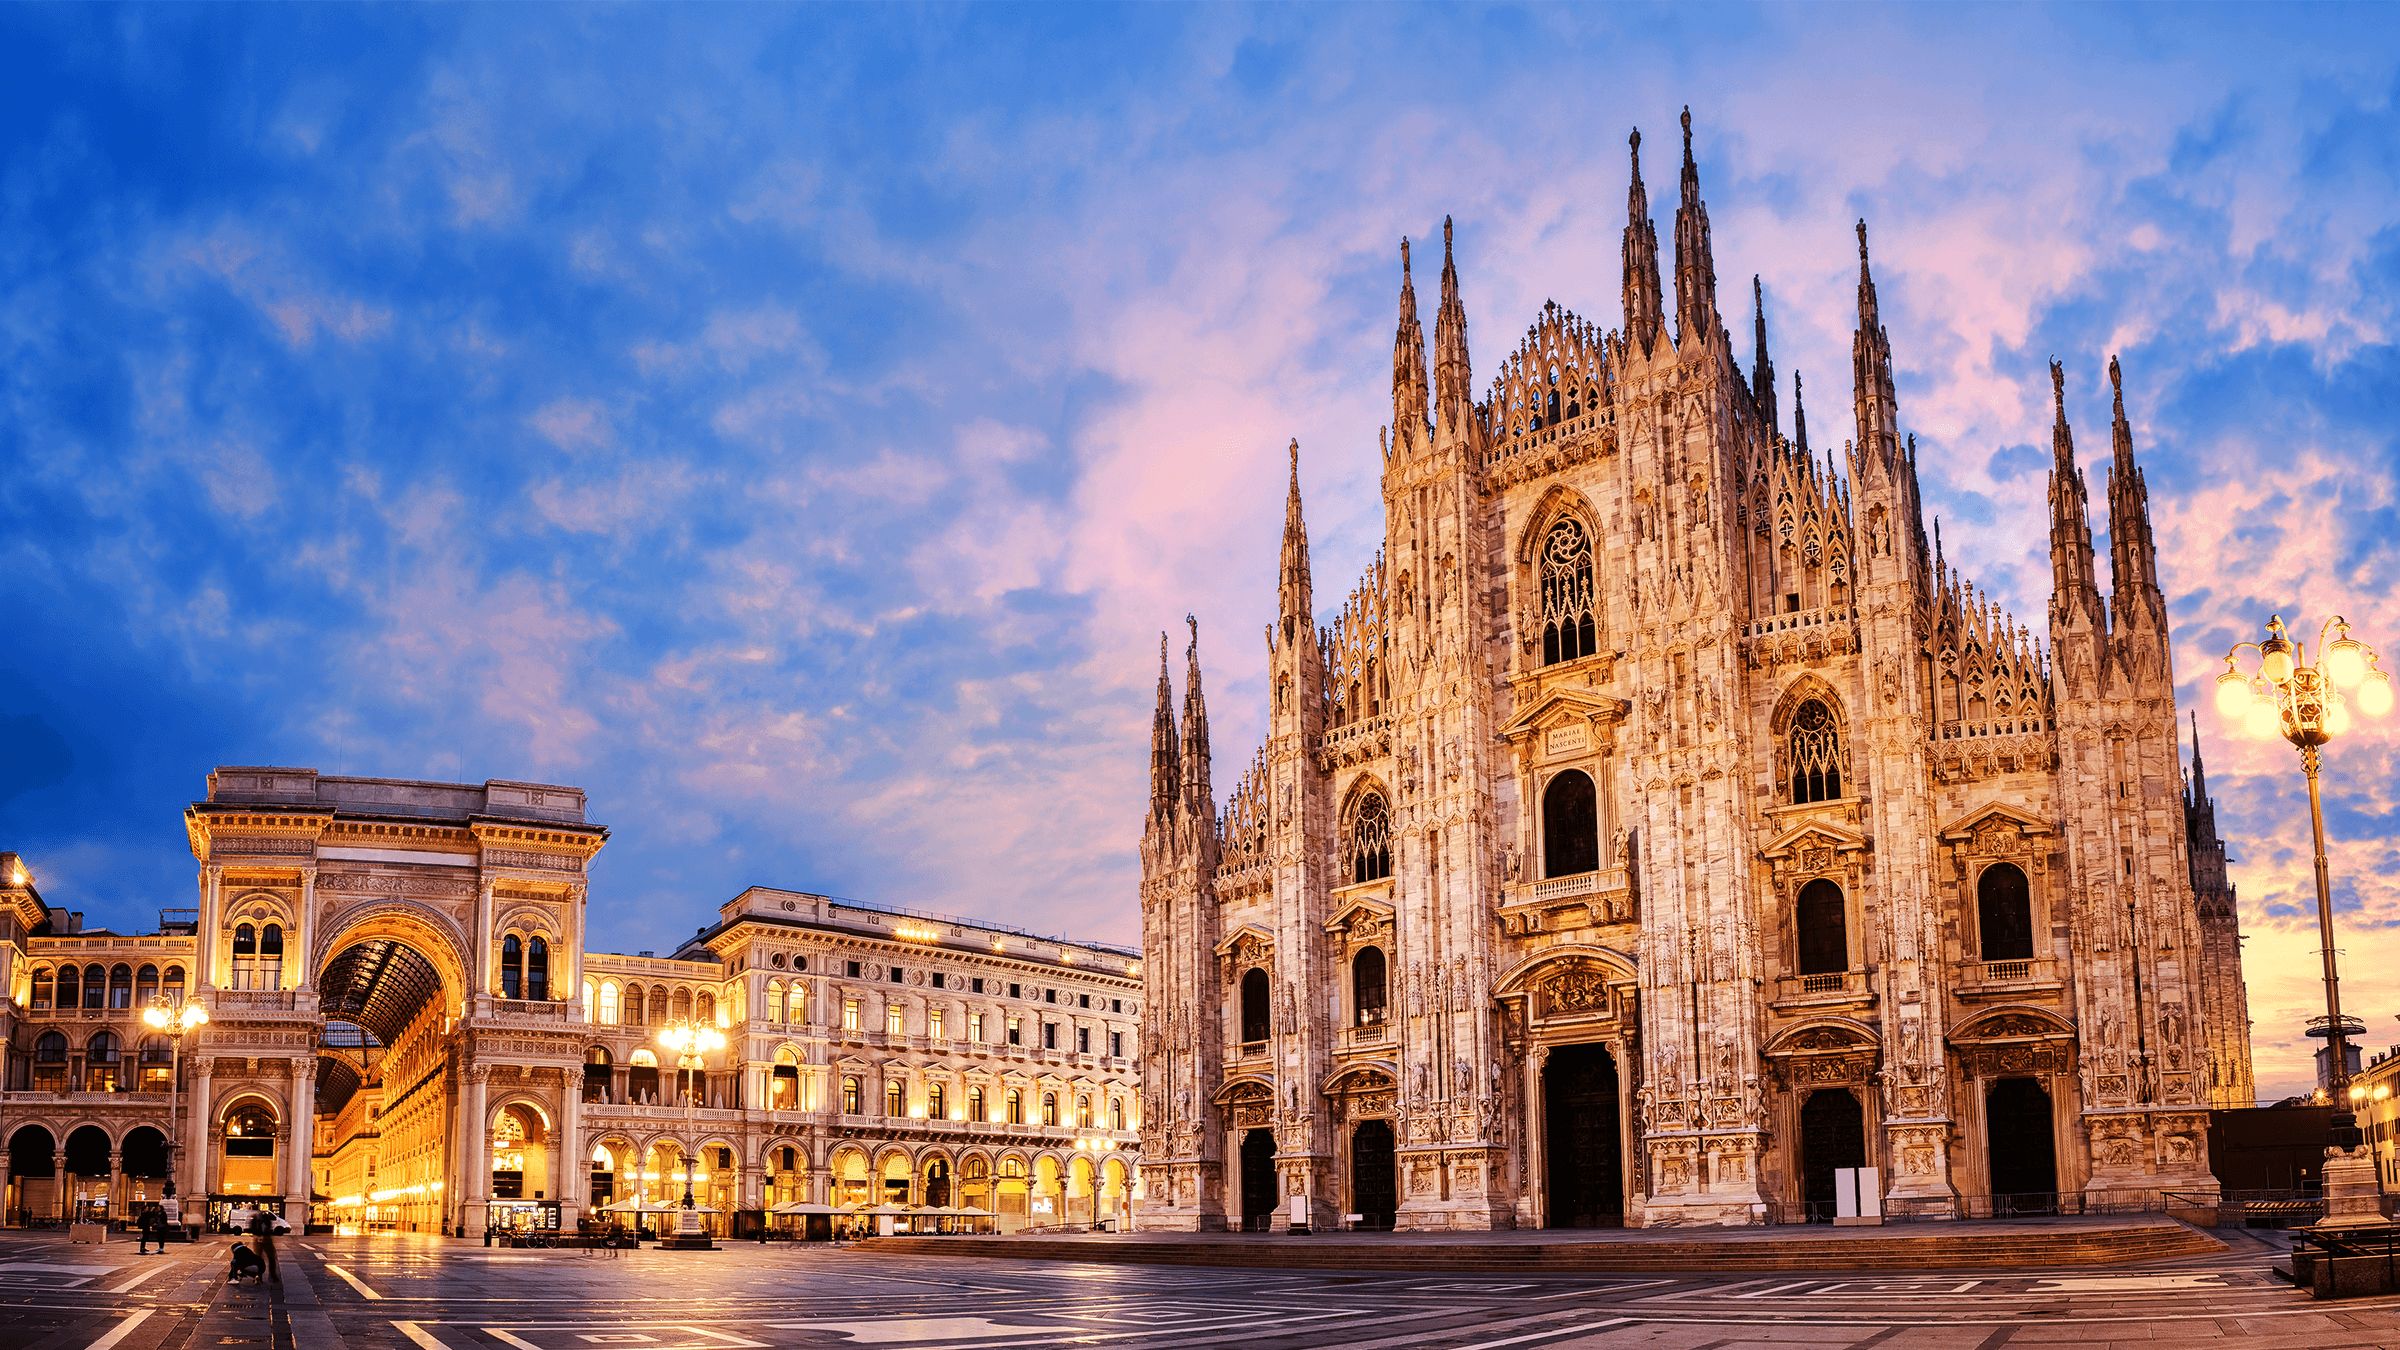 The Metropolitan Cathedral-Basilica of the Nativity of Saint Mary, Milan at sunset